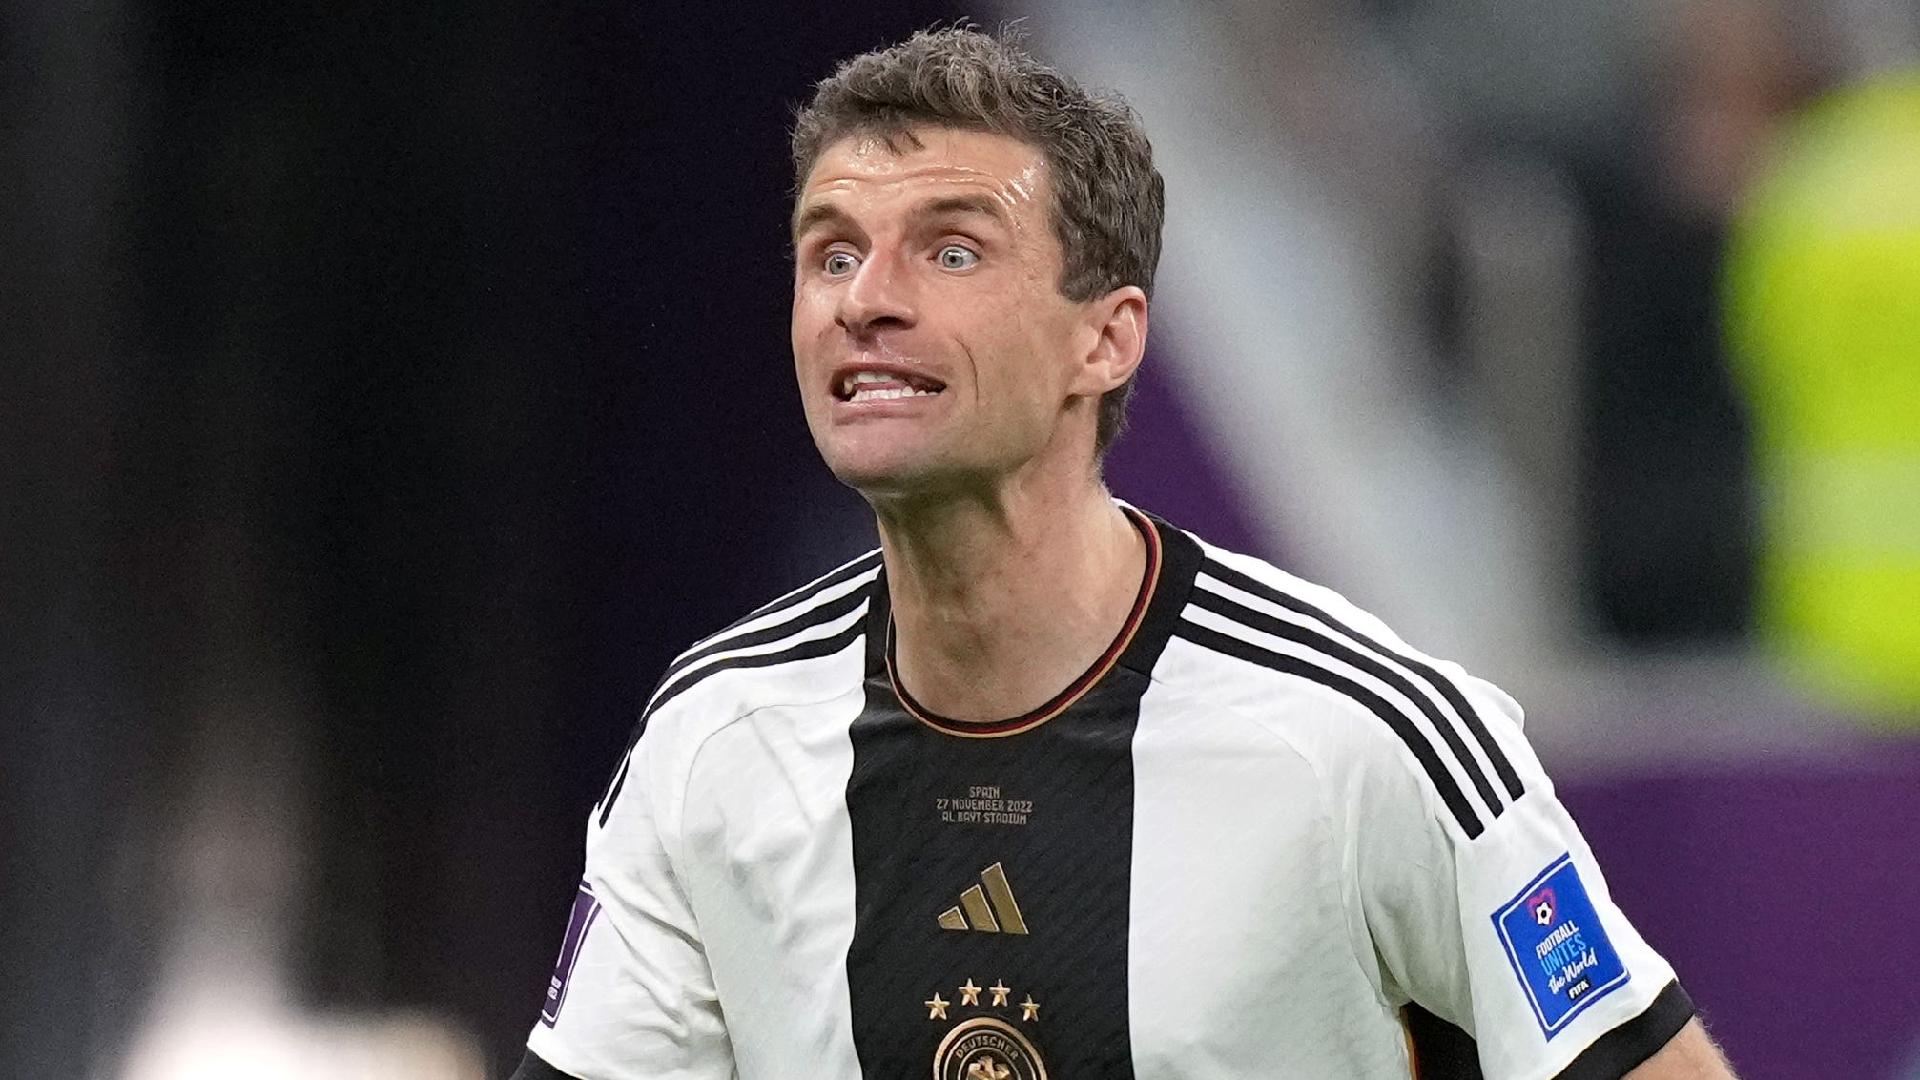 Football rumours: Thomas Muller linked with move to Manchester United